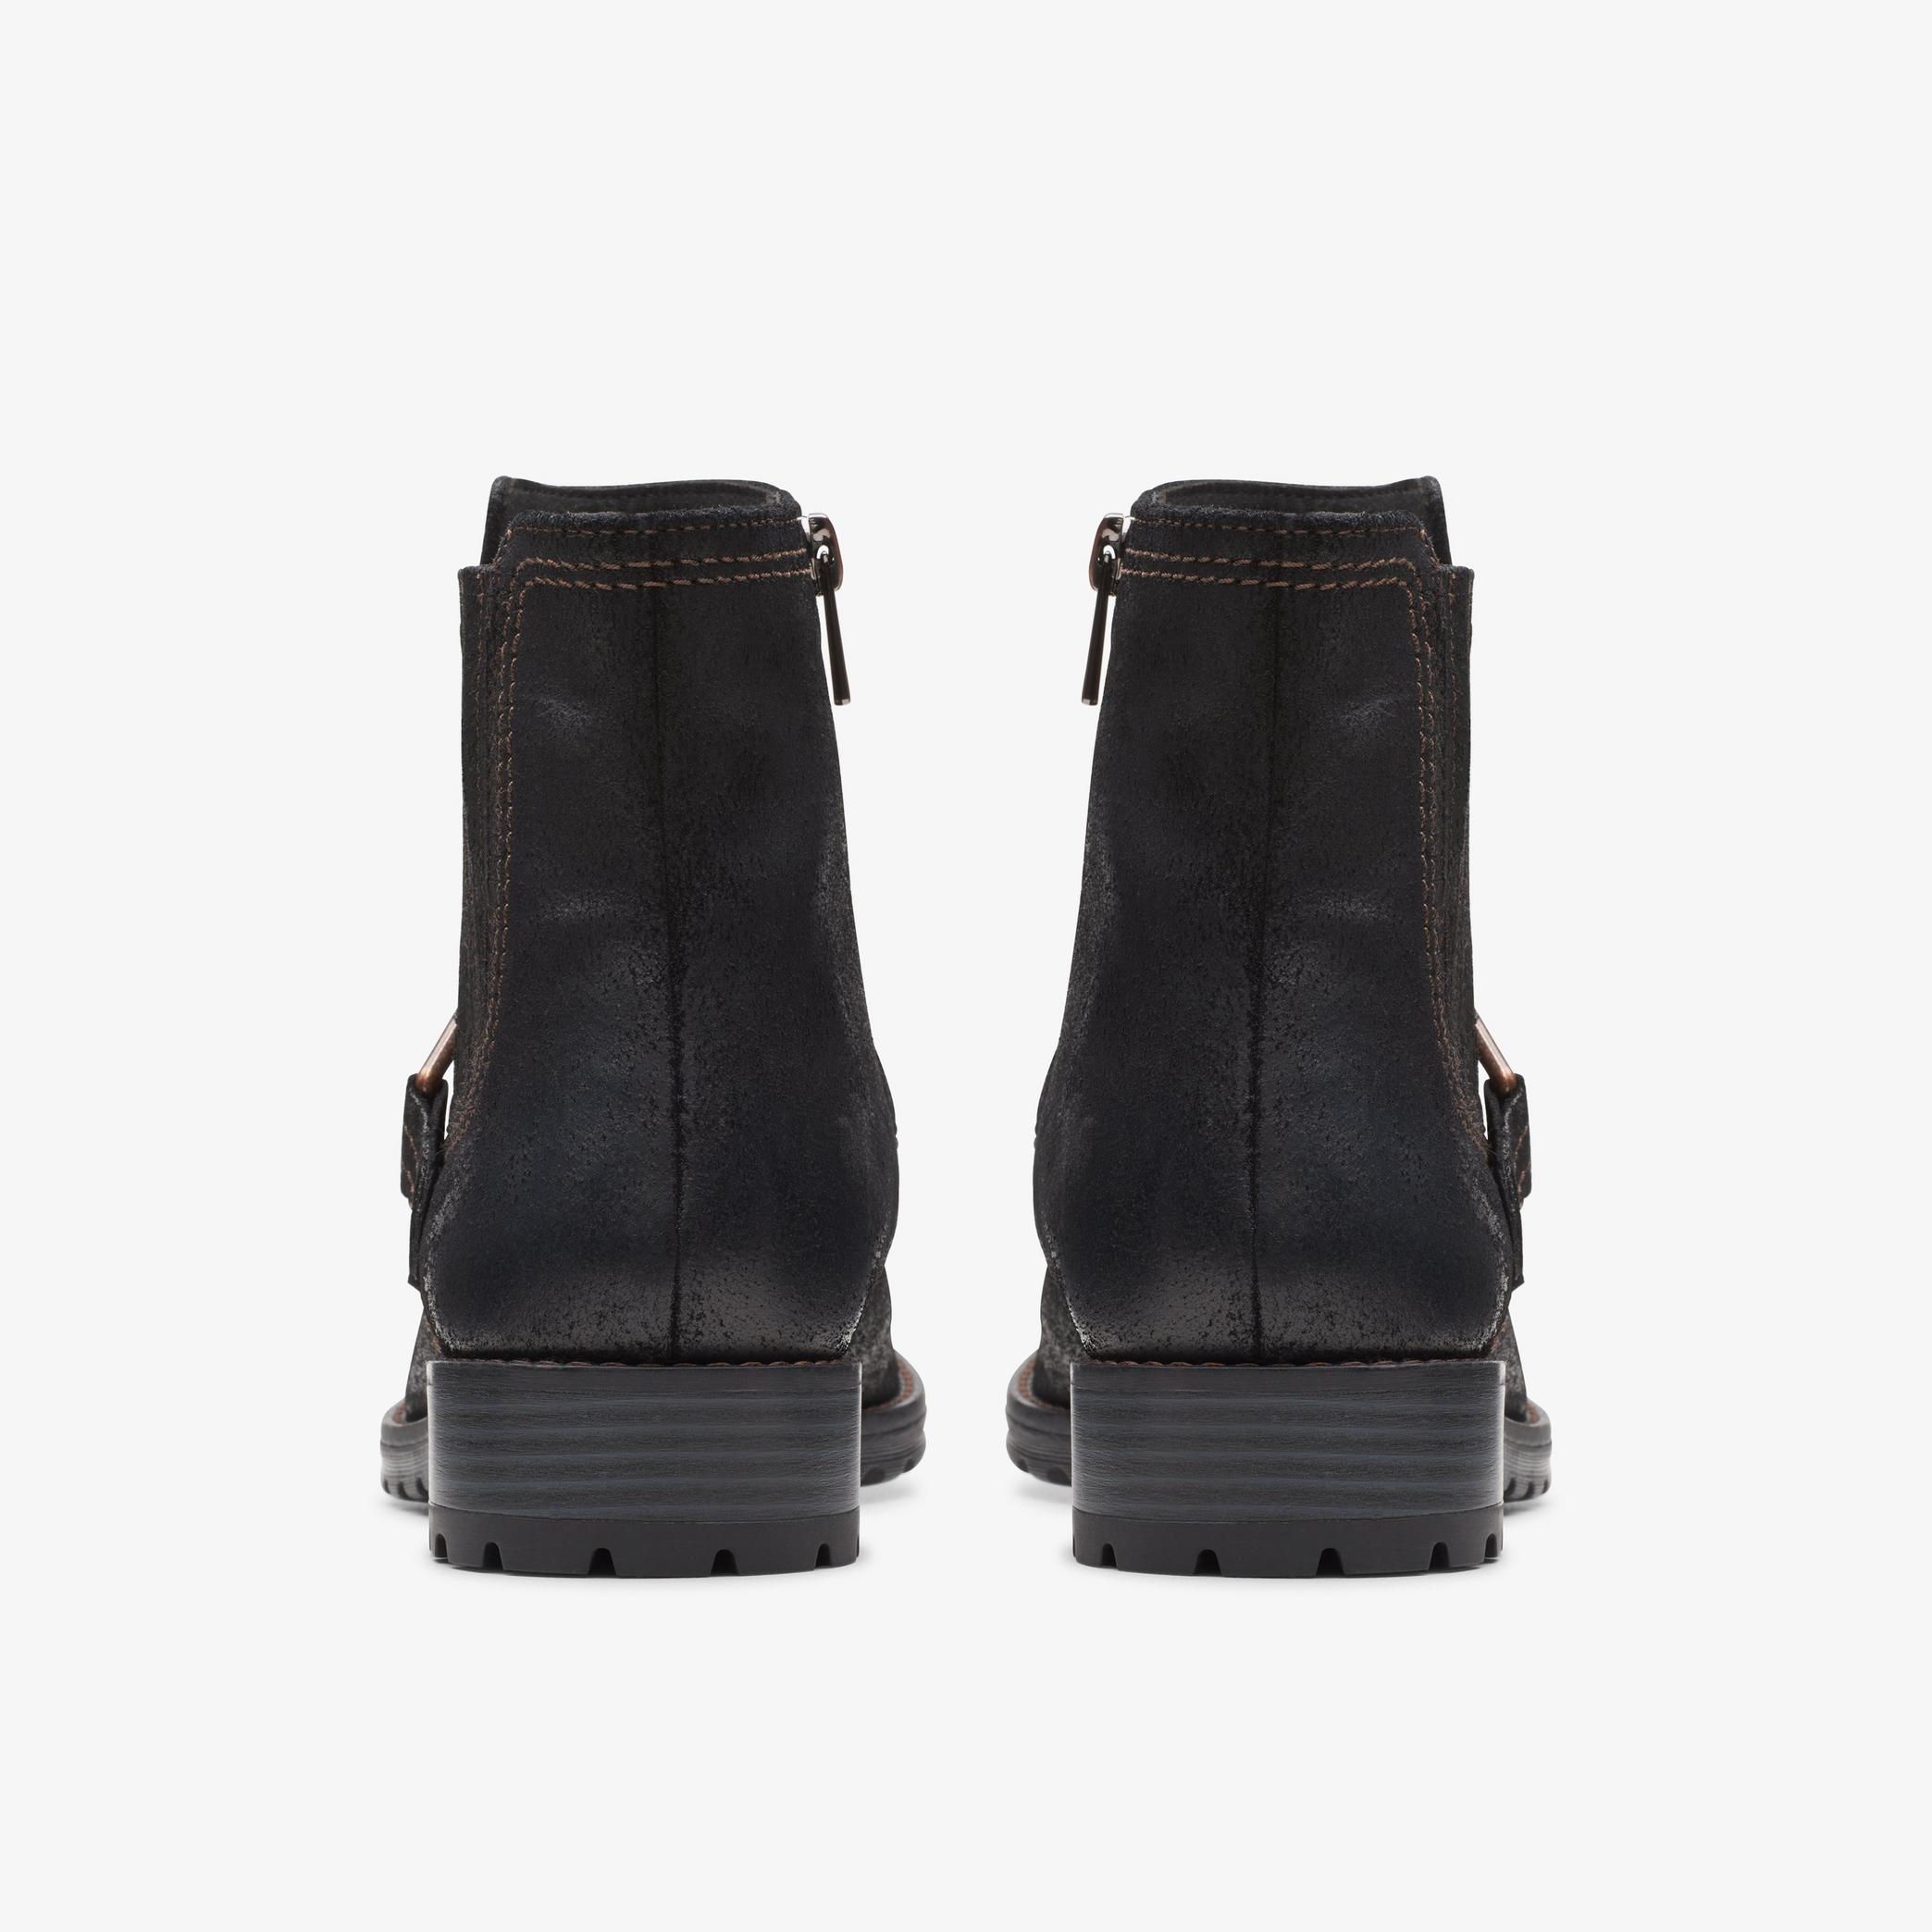 Aspra Buckle Black Suede Ankle Boots, view 6 of 7